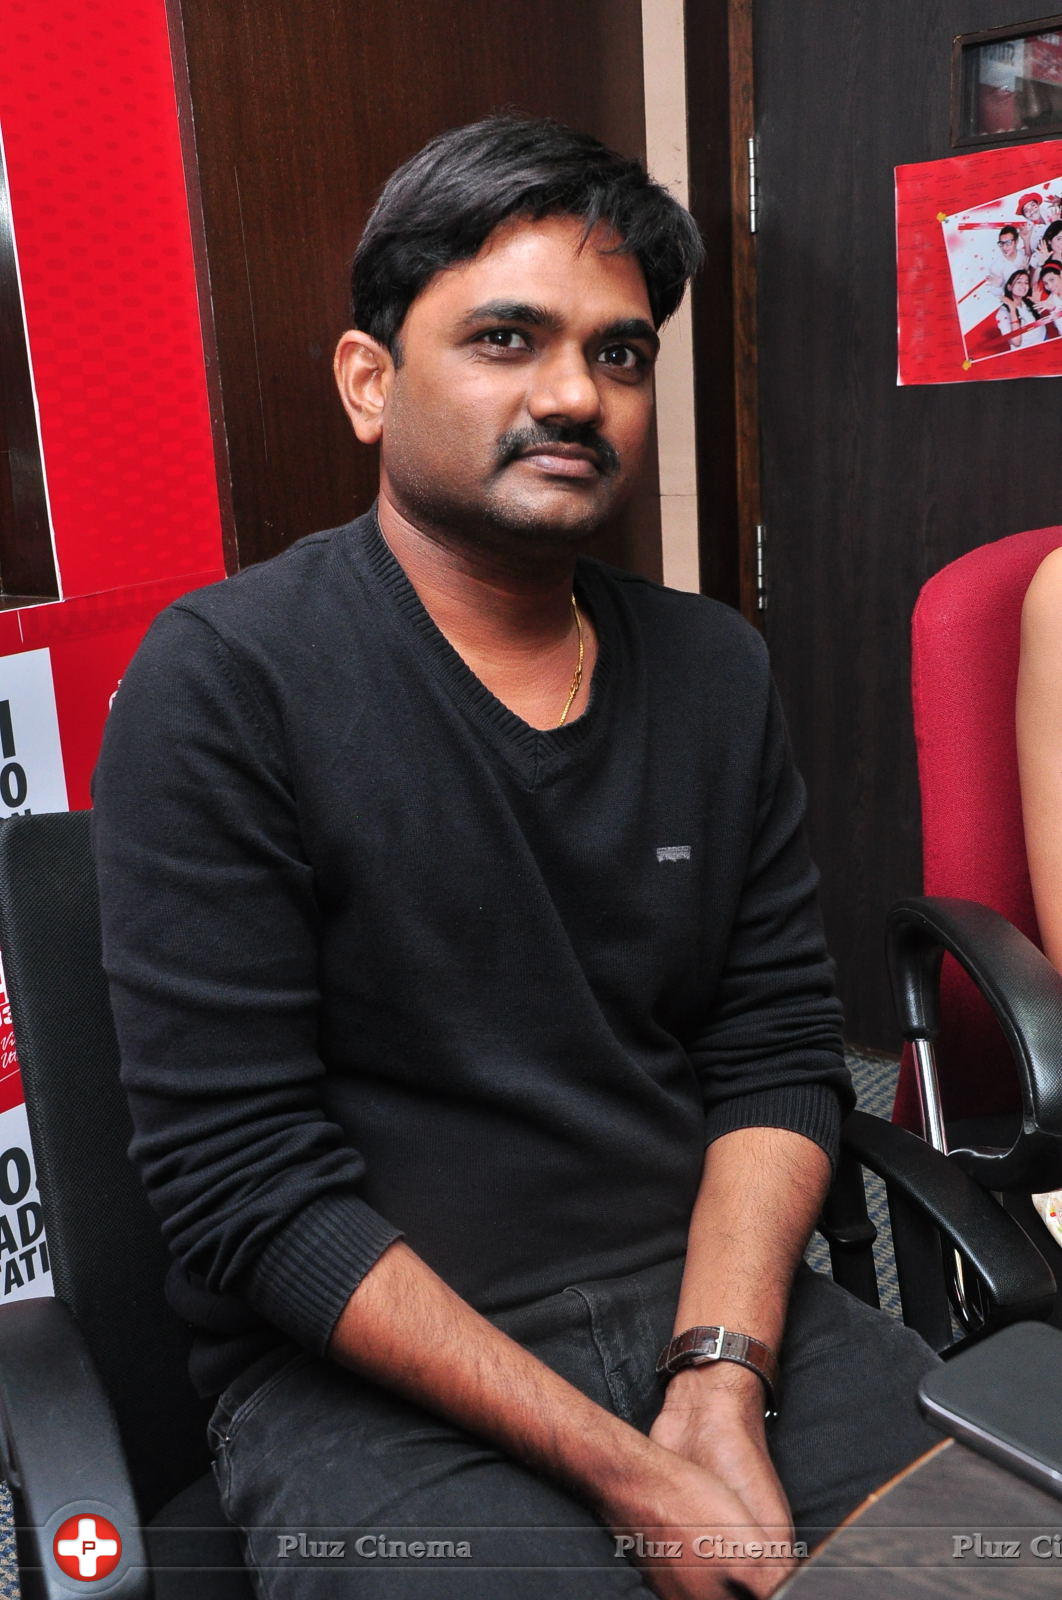 Maruti - Bhale Bhale Magadivoy Movie Song Launch at 93.5 Red FM Photos | Picture 1094120